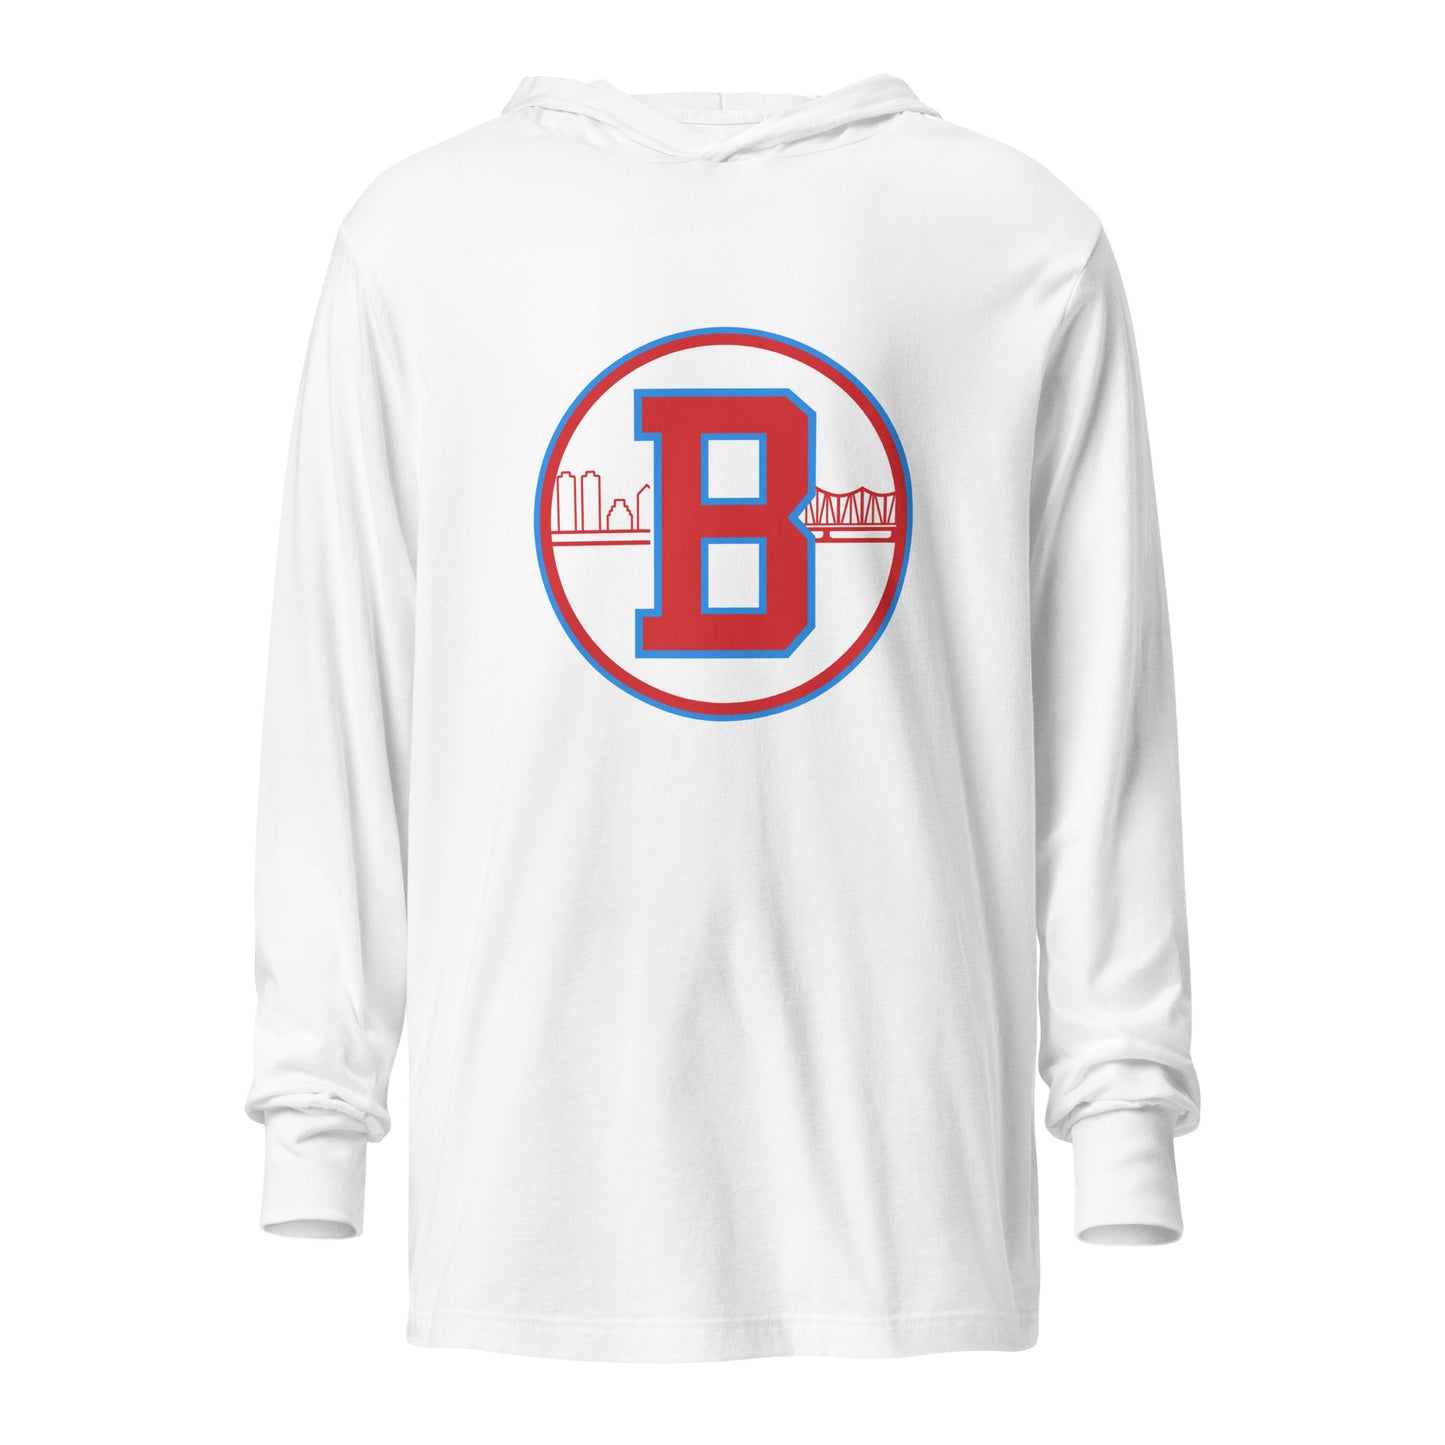 Home of the Brave Hooded Long Sleeve T-Shirt